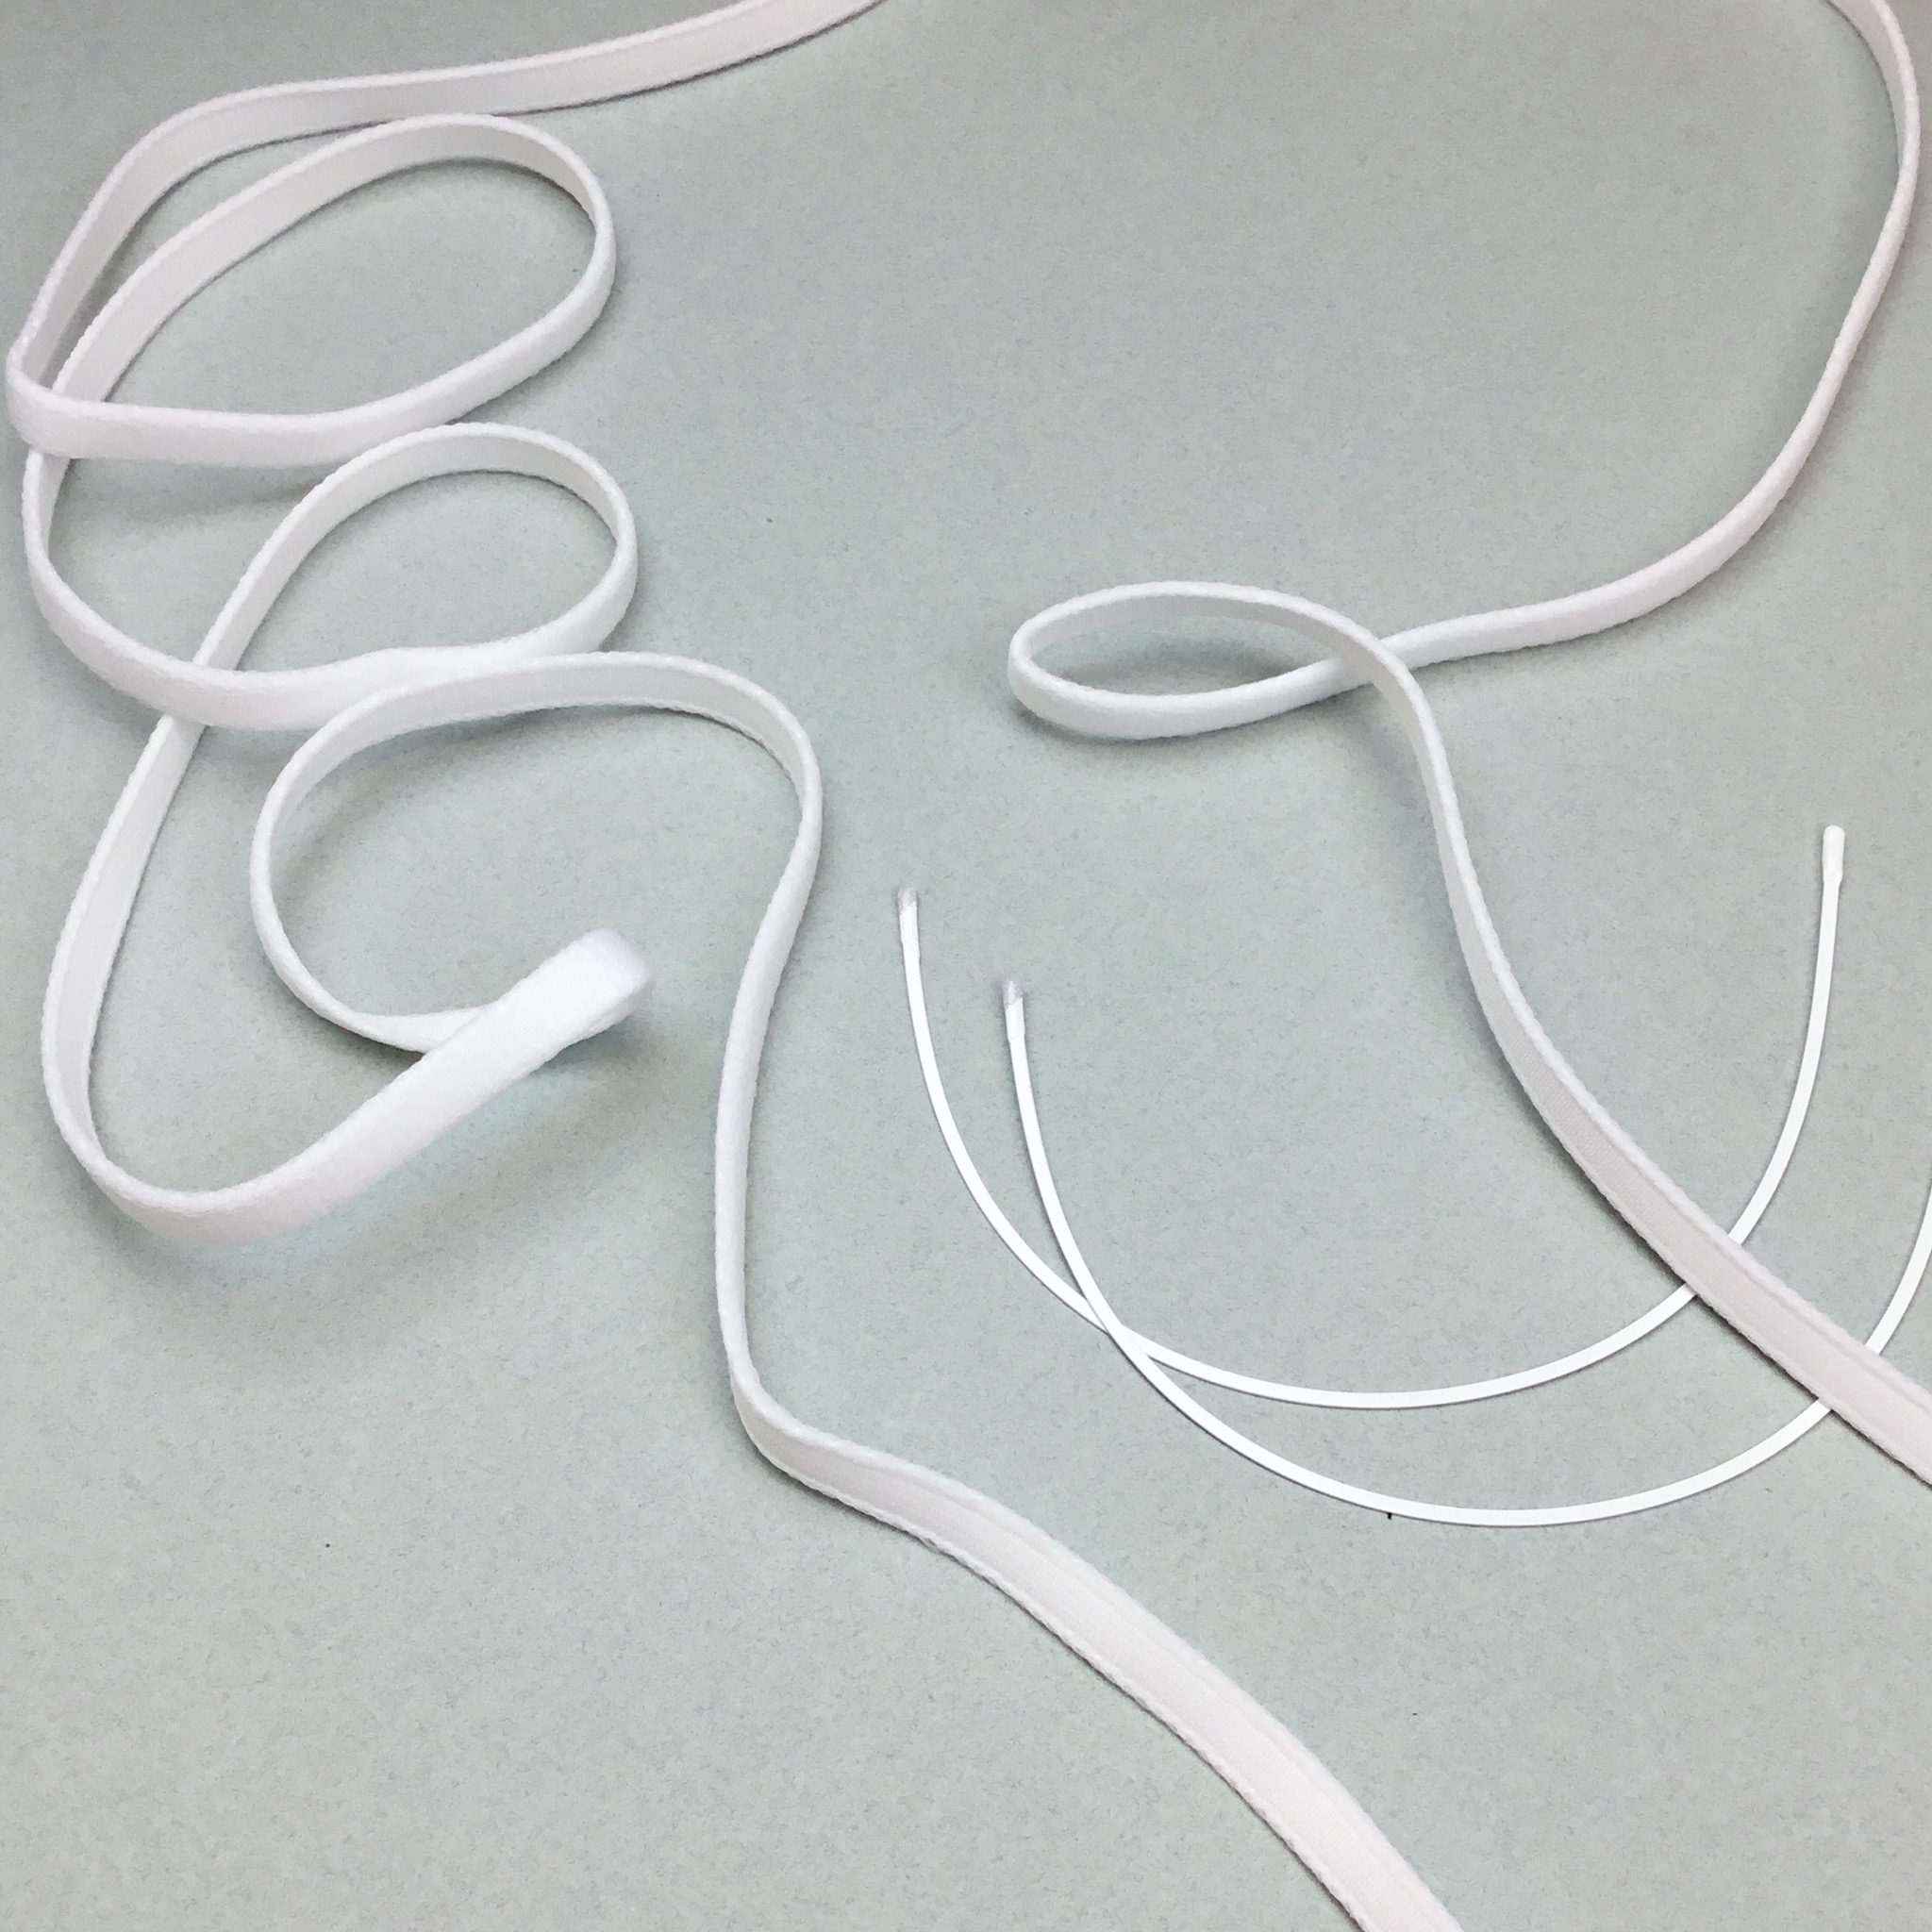 (Defective Closeout Sale: Paint Removed & Scratch) Steel Bra Underwire,  Sturdy Metal Bra Wire for Bra Shaping, White, 70x120mm